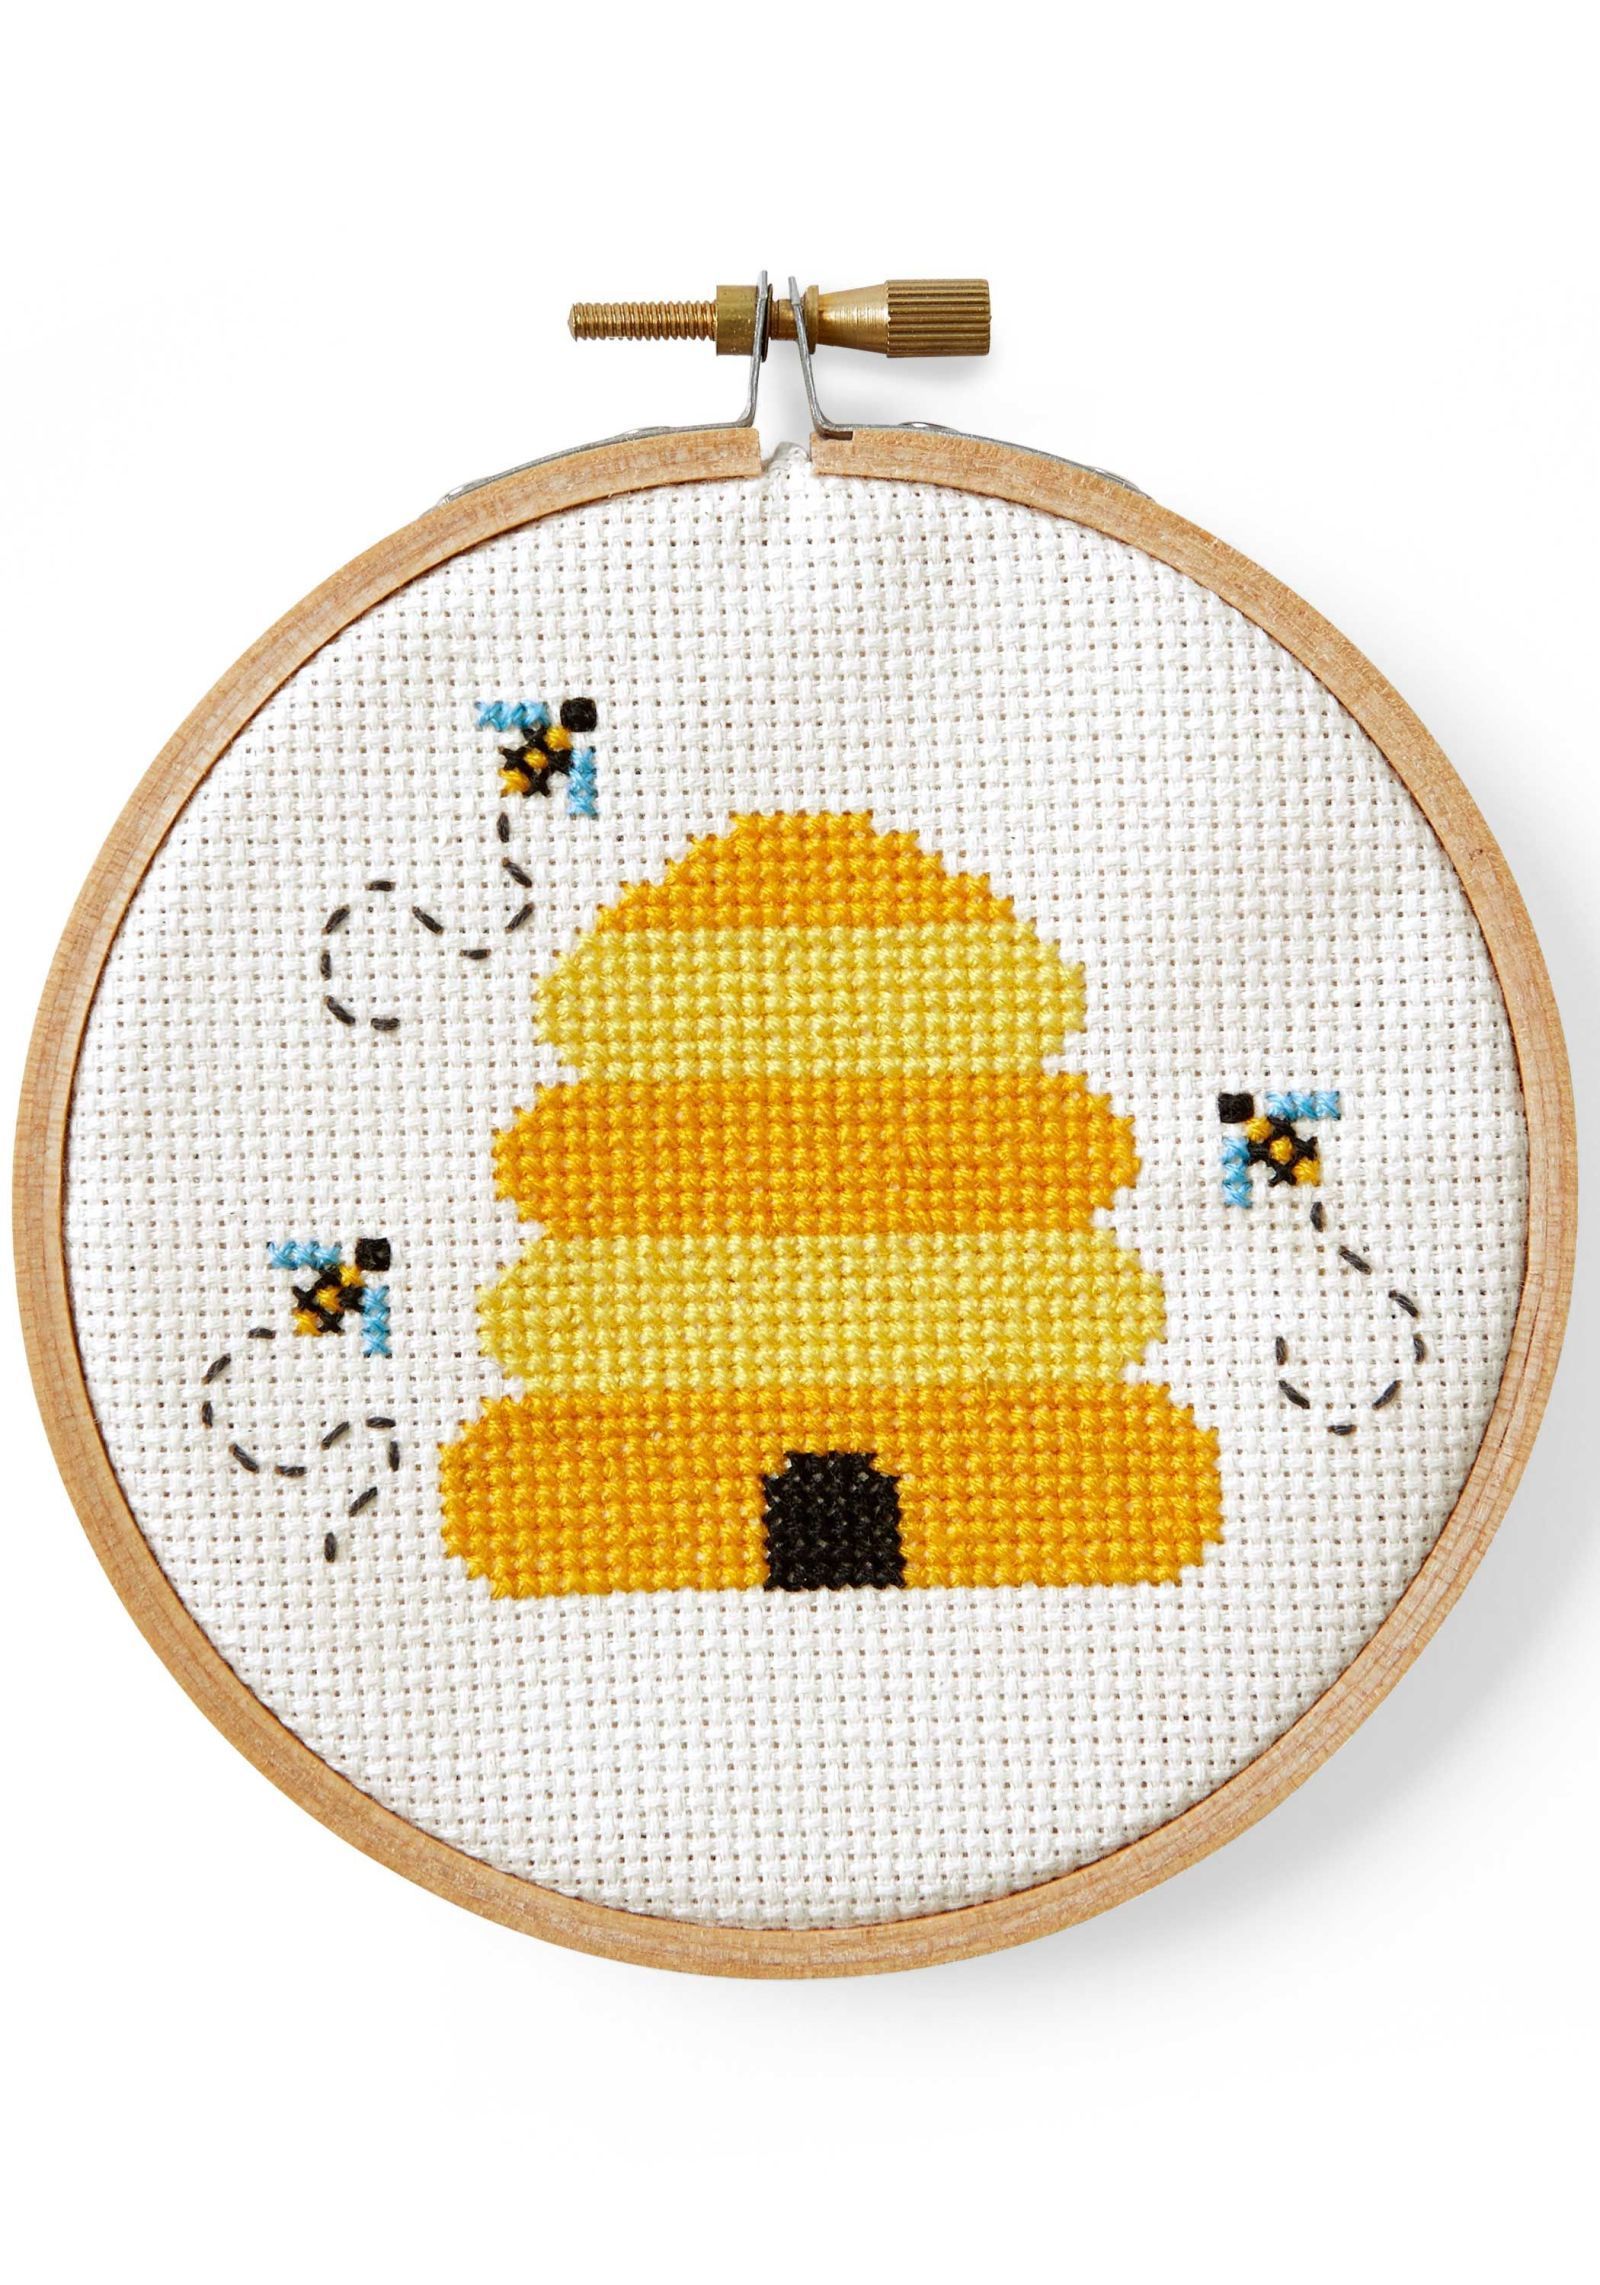 Country Living’s Free Cross-Stitch Patterns  – CountryLiving.com